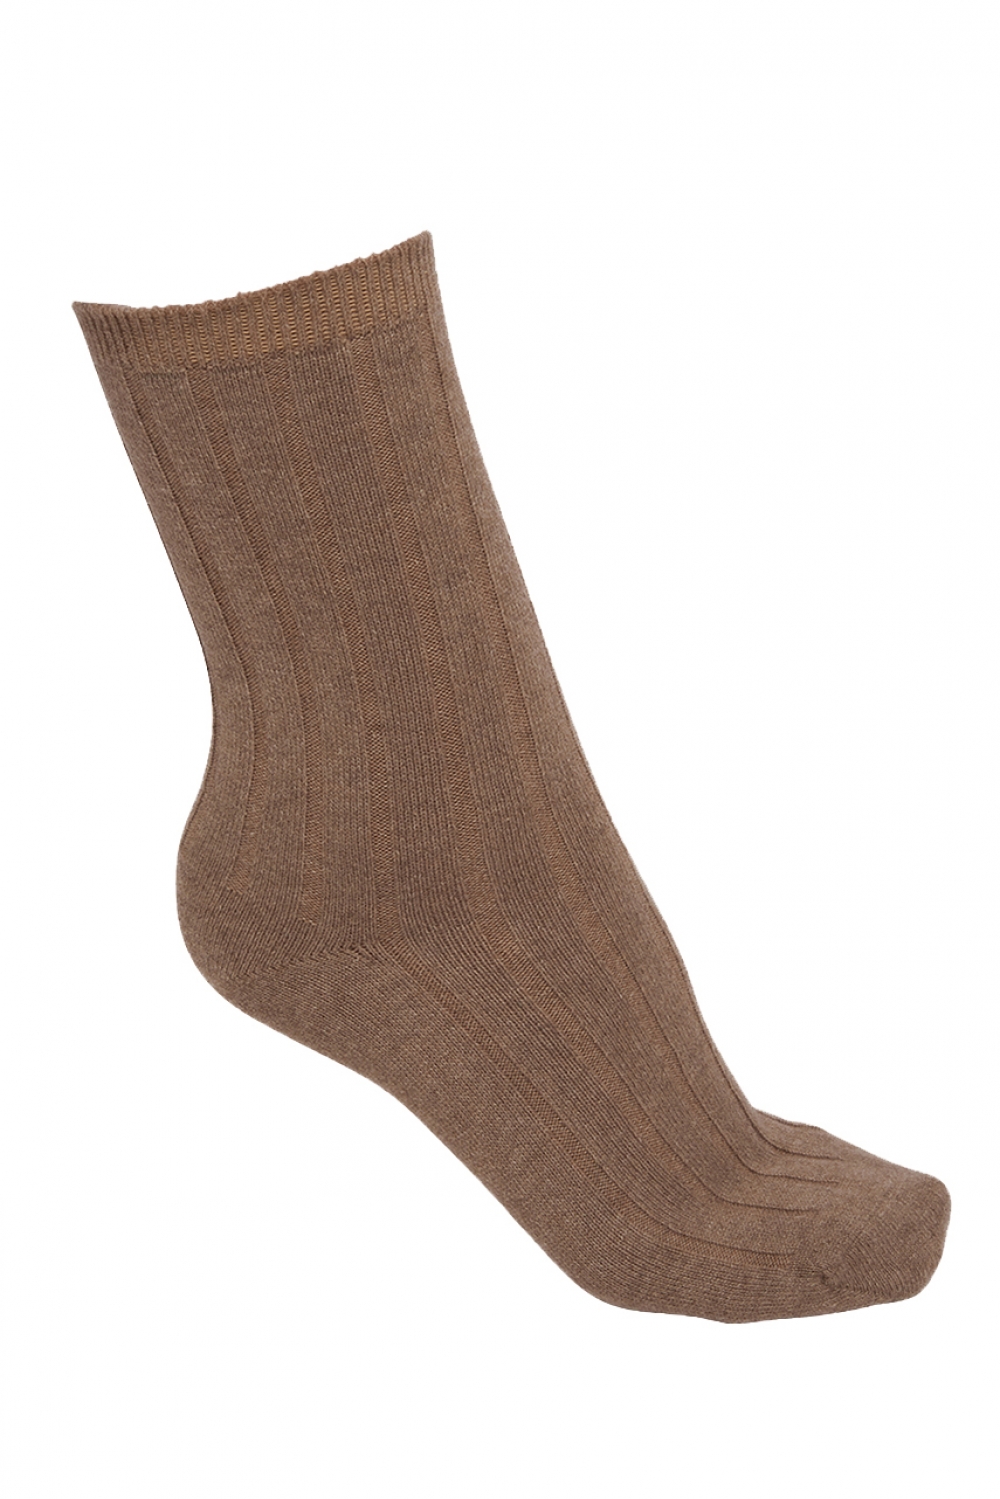 Cachemire & Elasthanne pull femme dragibus w natural brown 35 38